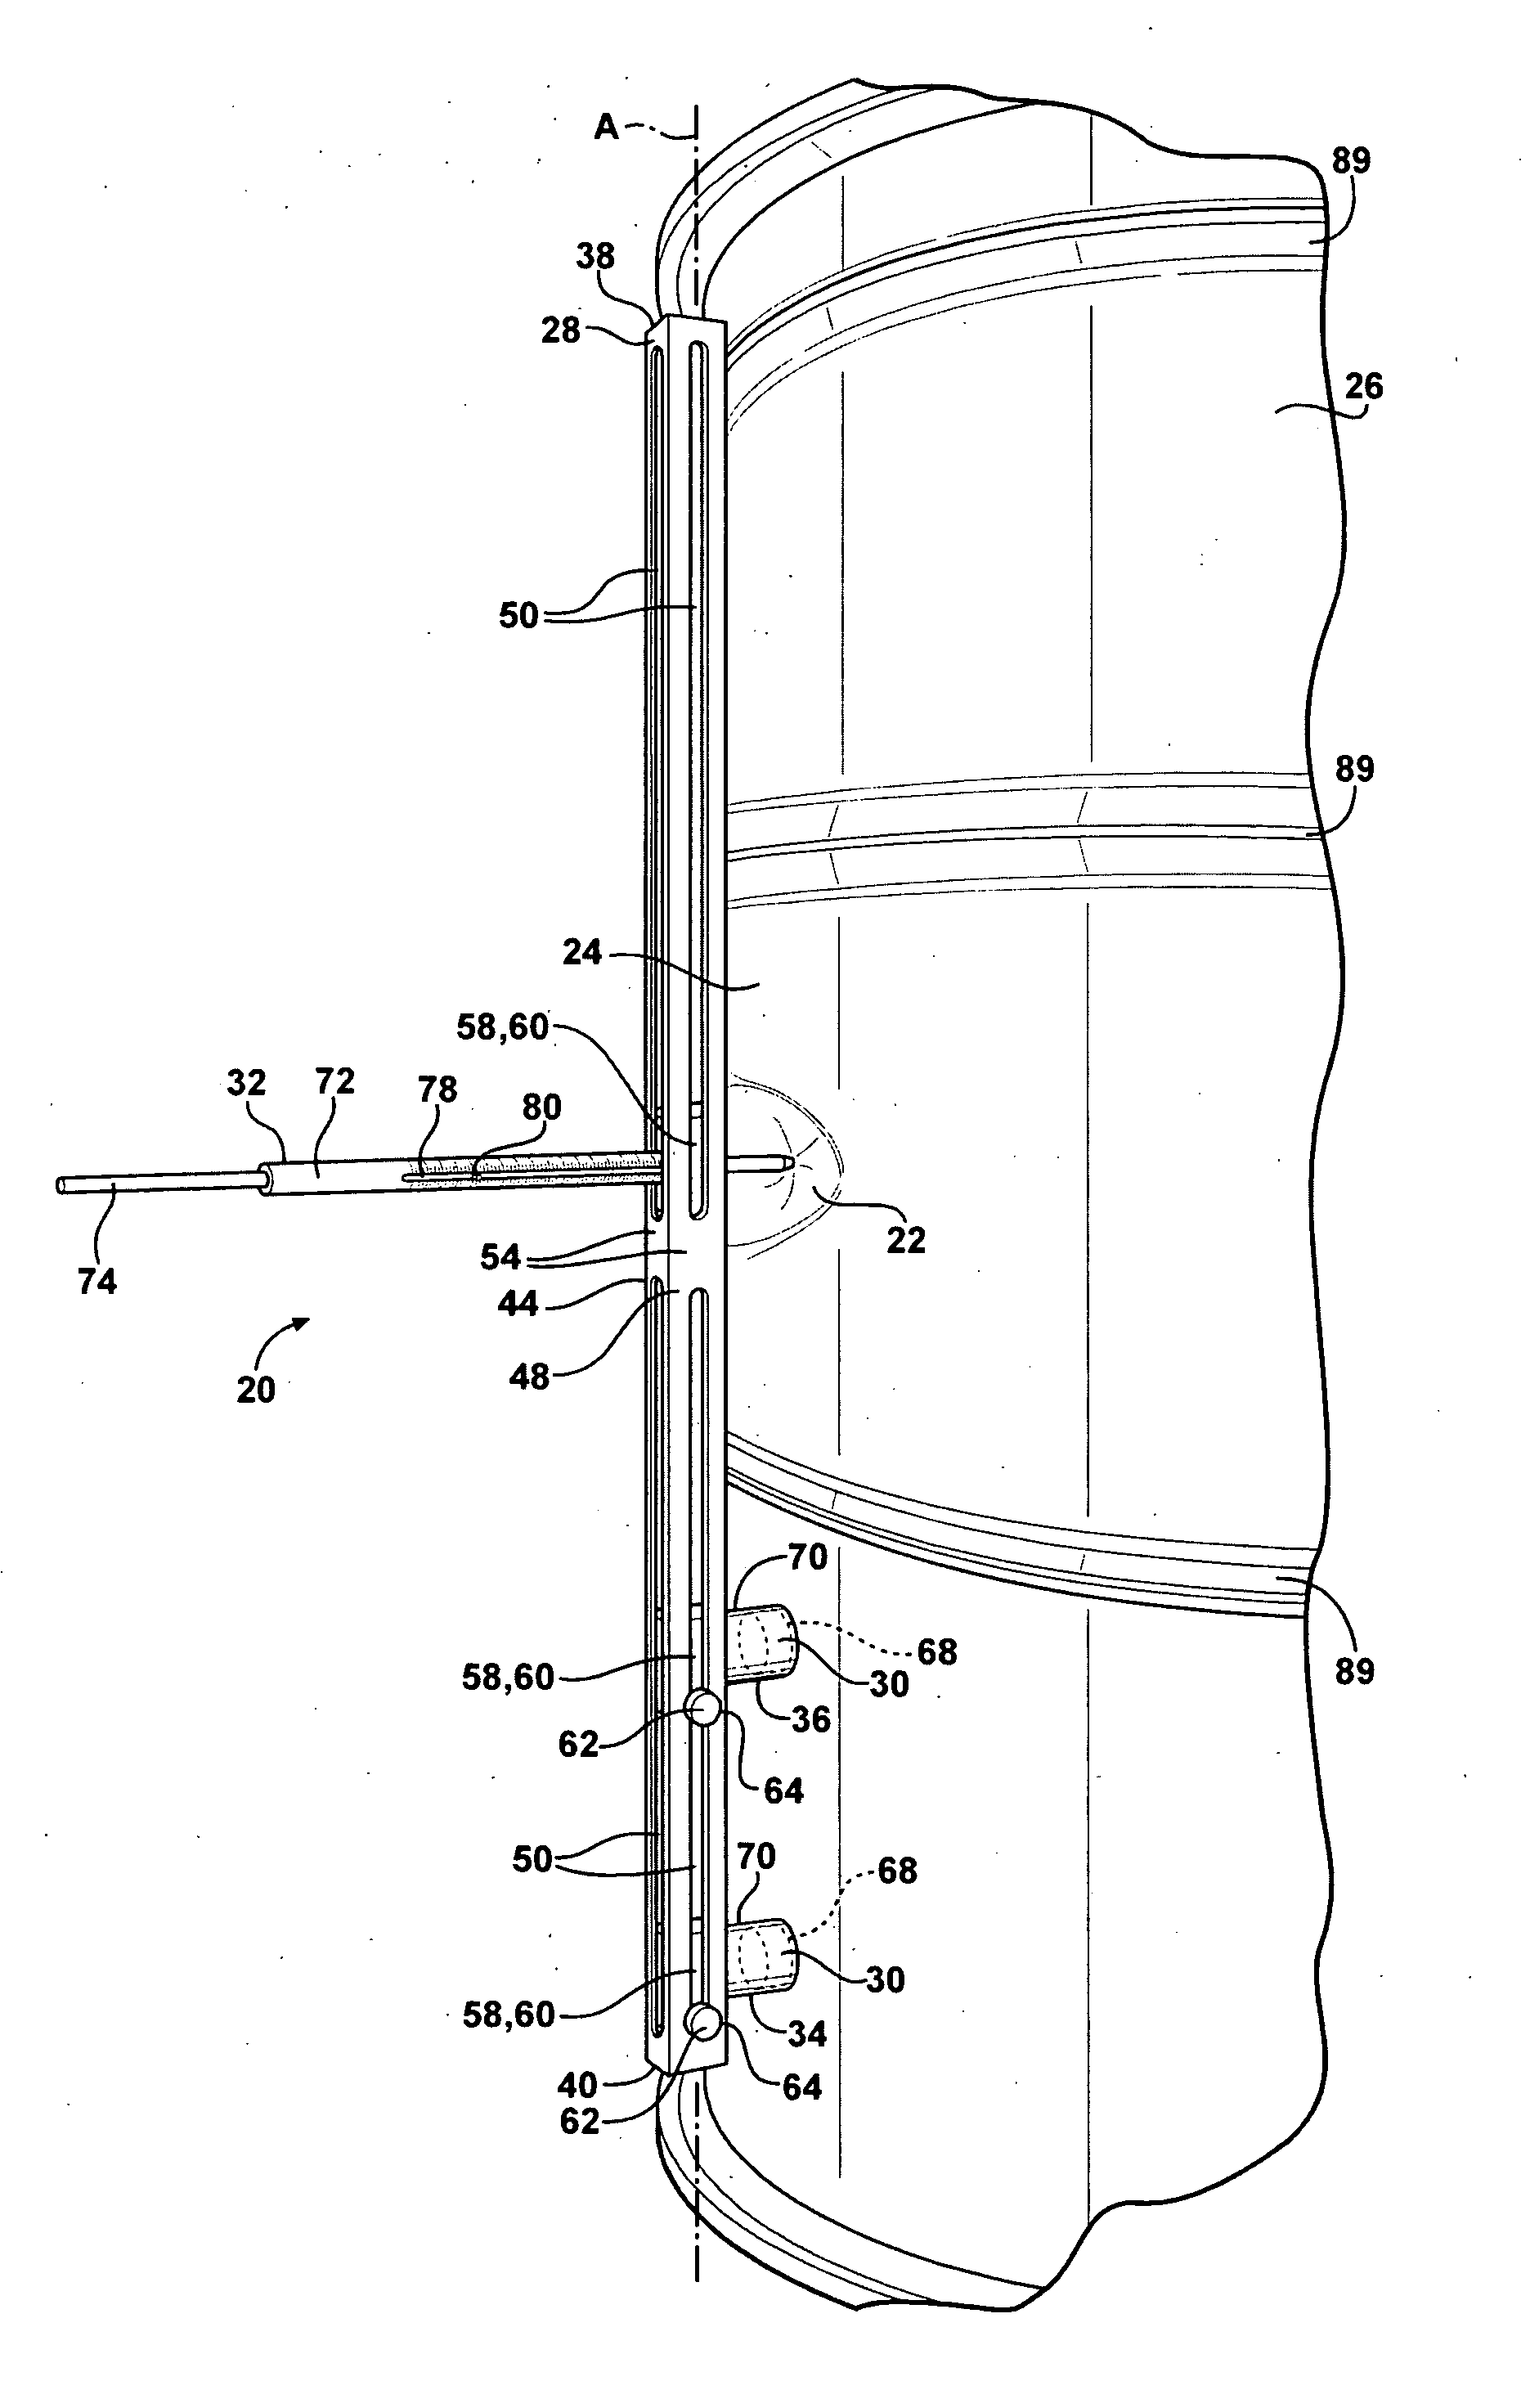 Method Of Measuring Dents And Method Of Classifying Dents